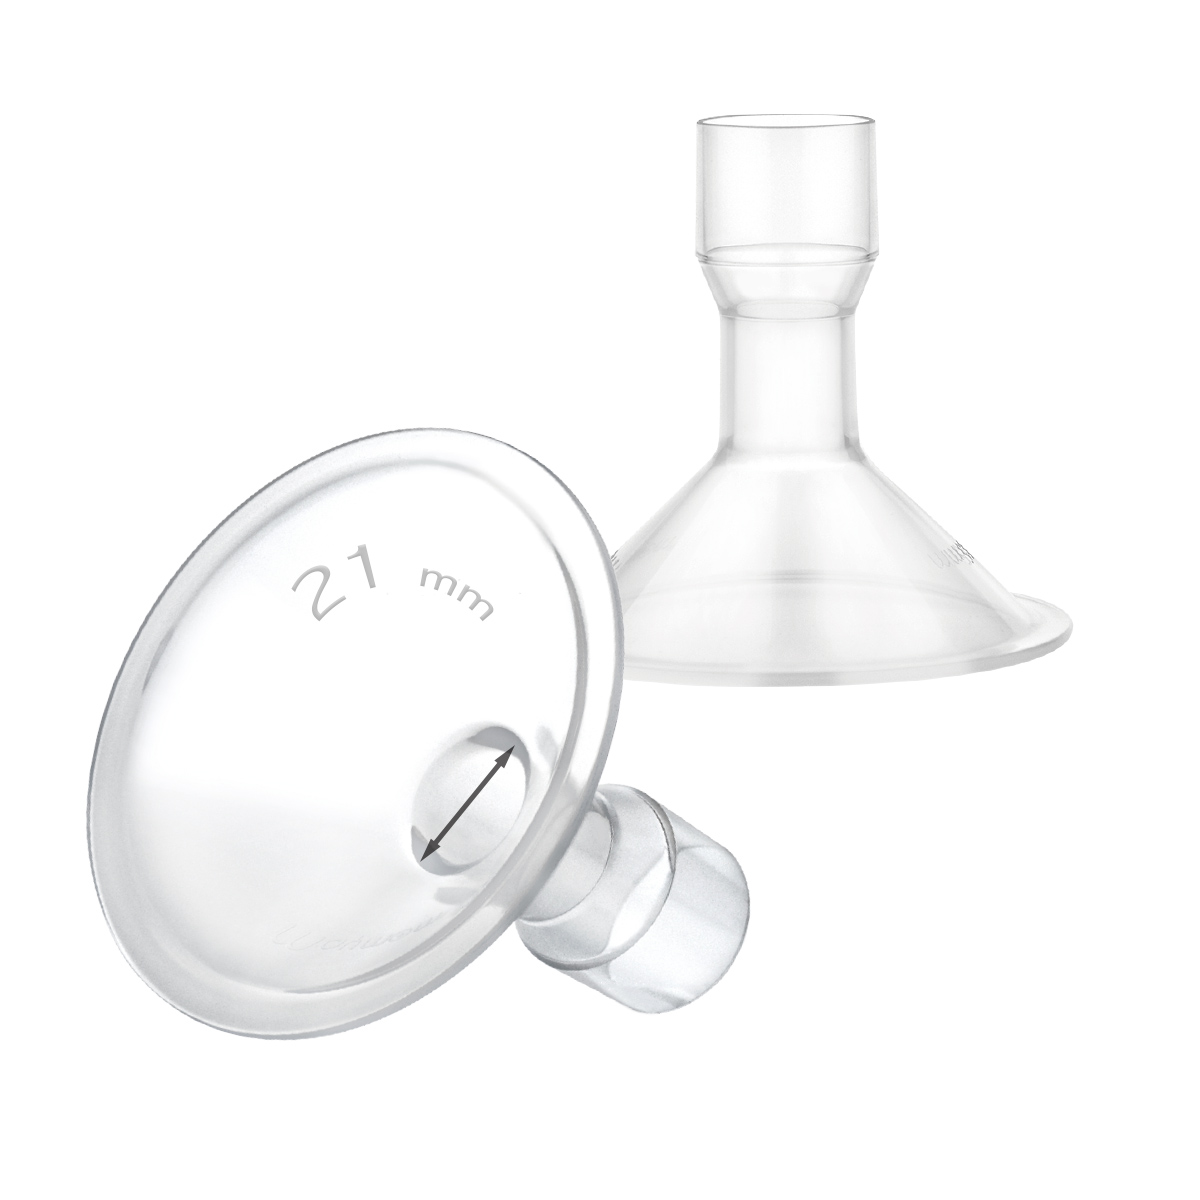 MyFit 21 mm Shield; Compatible with Medela Breast Pumps Having PersonalFit, Freestyle, Harmony, Maxi Connector; Connects; 2pc